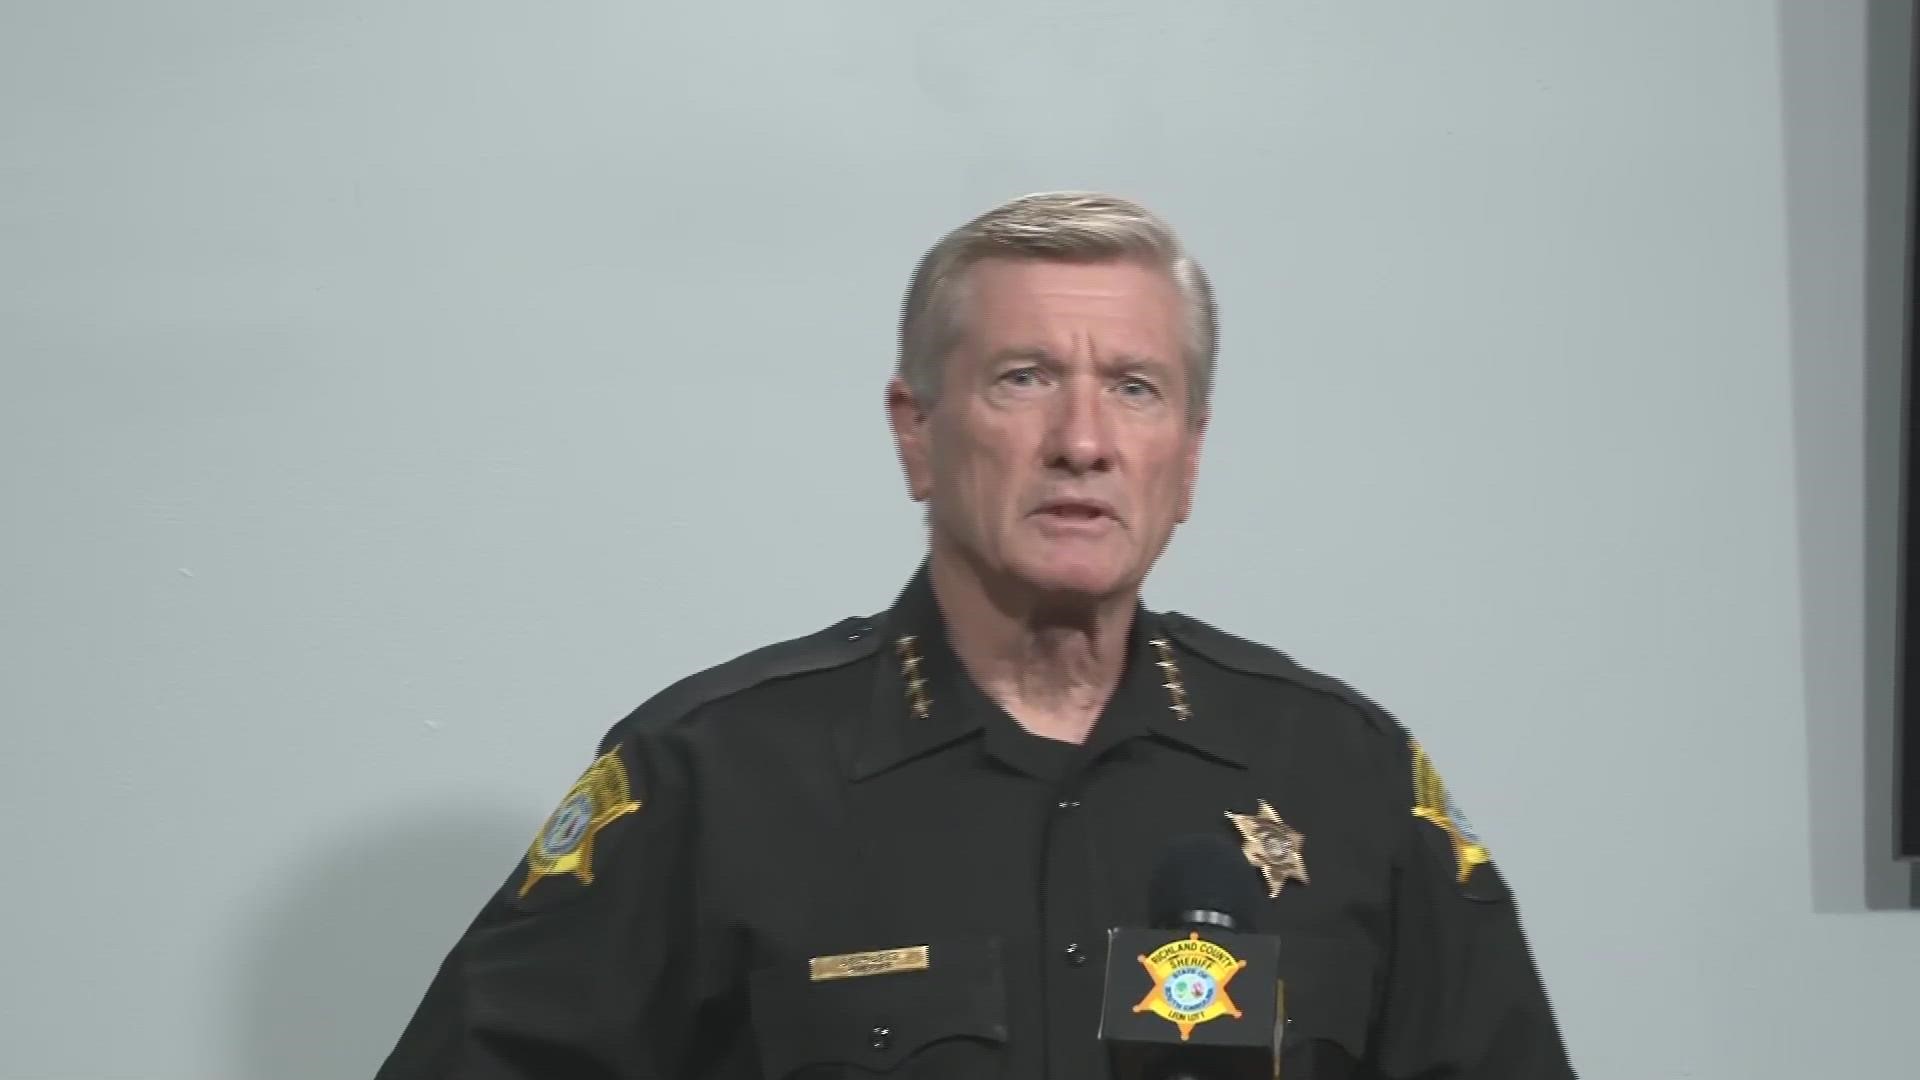 Sheriff Leon Lott says a man lured deputies to a northeast Columbia in what he called an 'ambush' to kill them.